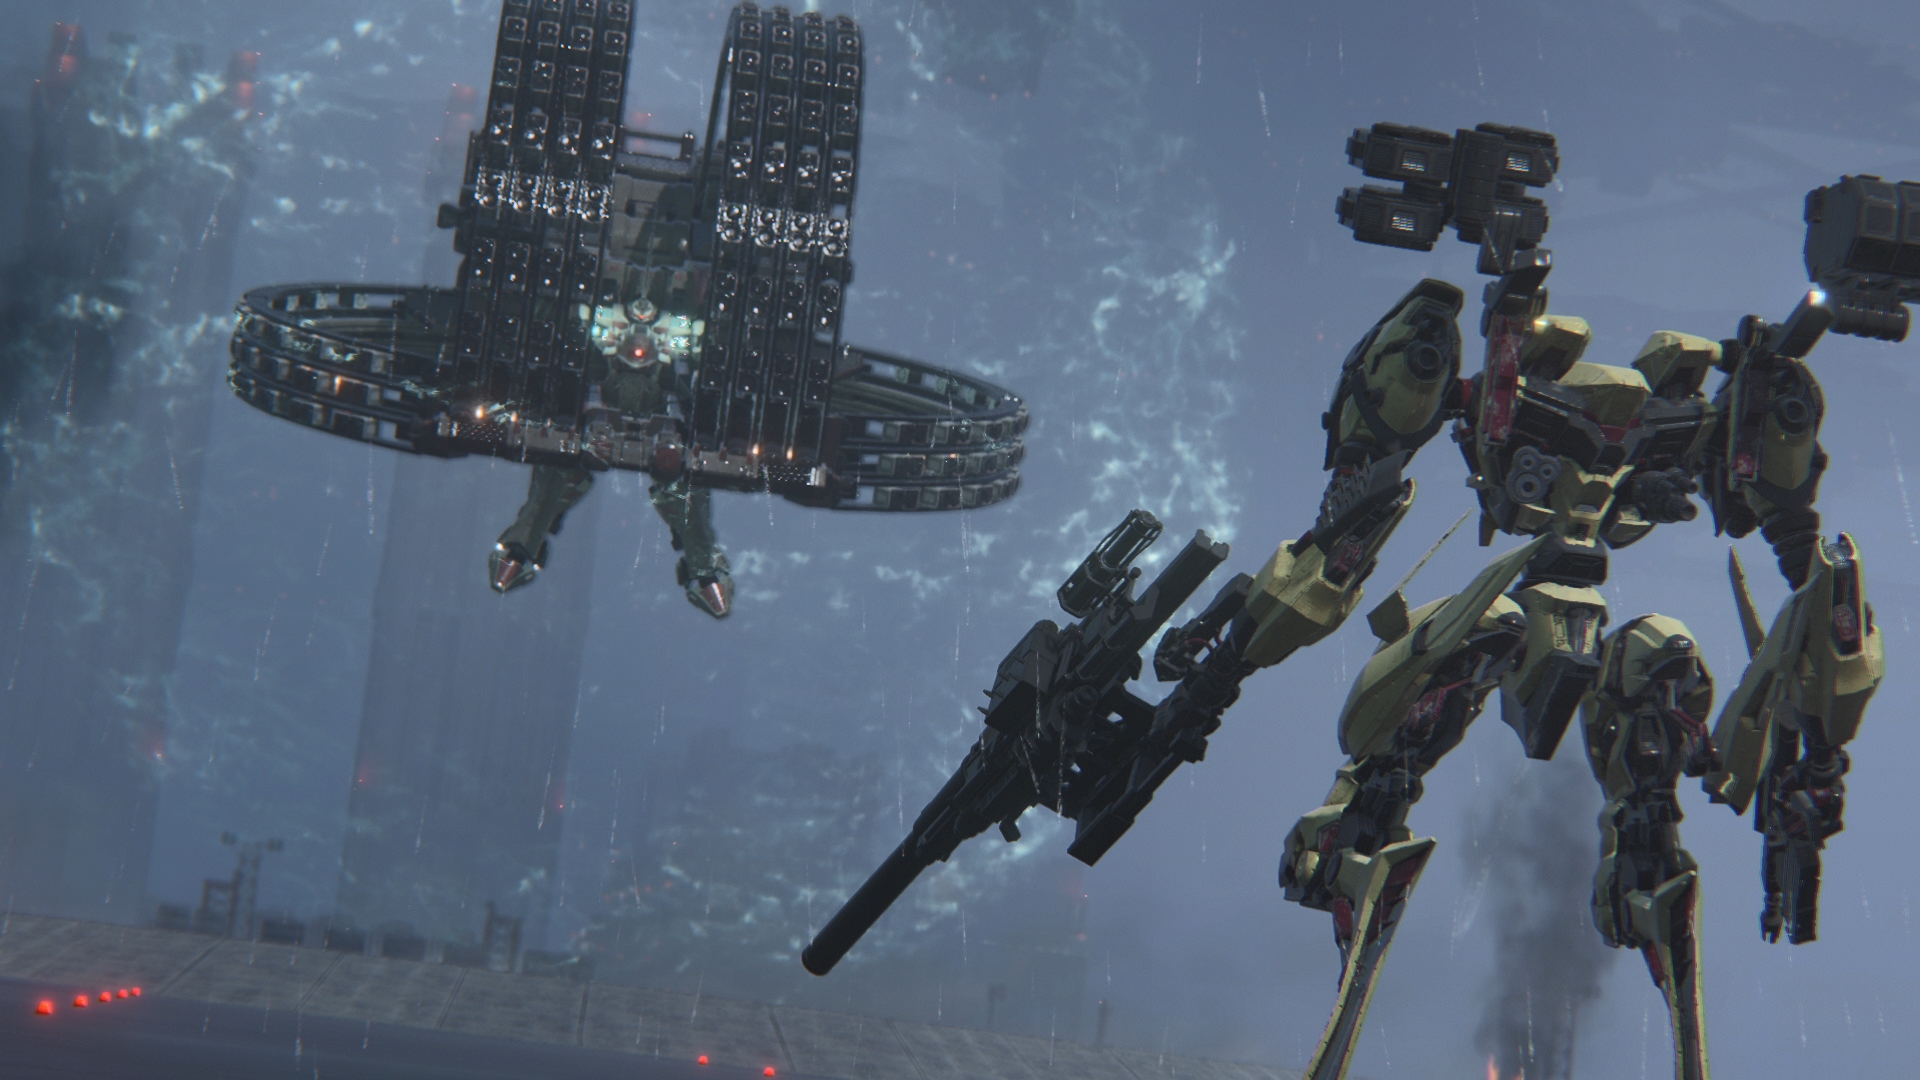 Unannounced Armored Core Game Once Again Teased By FromSoftware